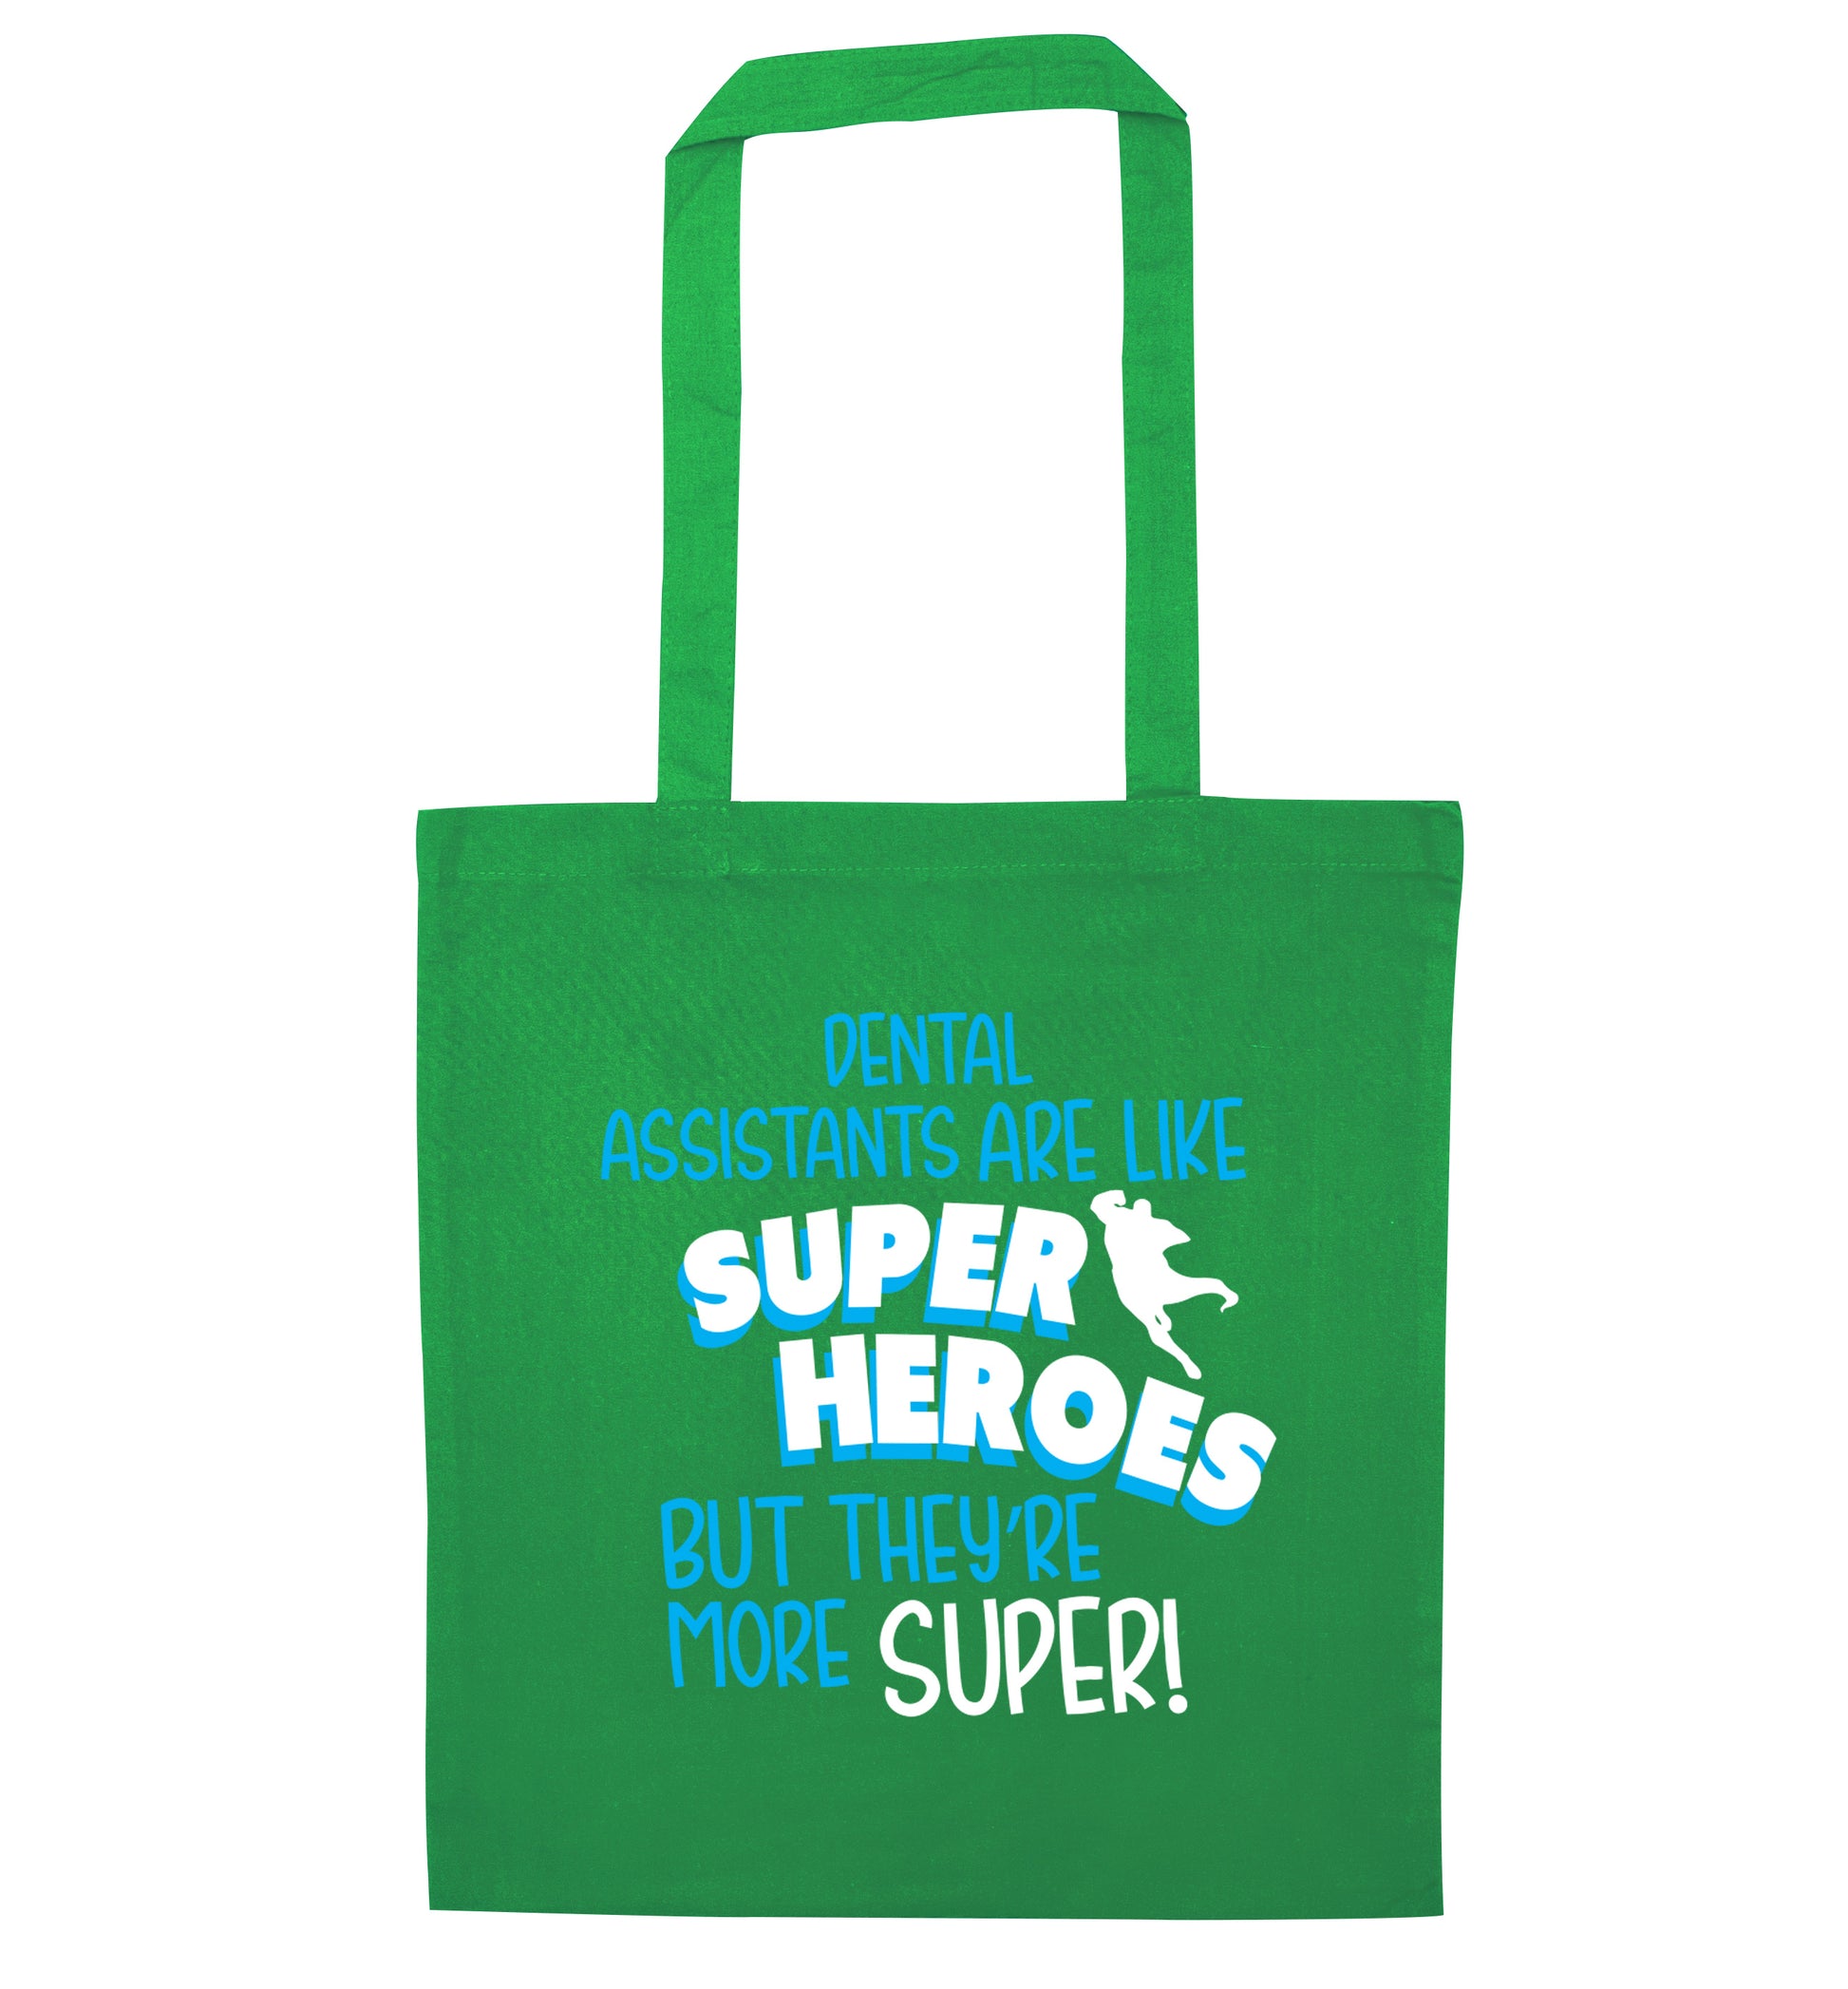 Dental Assistants are like superheros but they're more super green tote bag